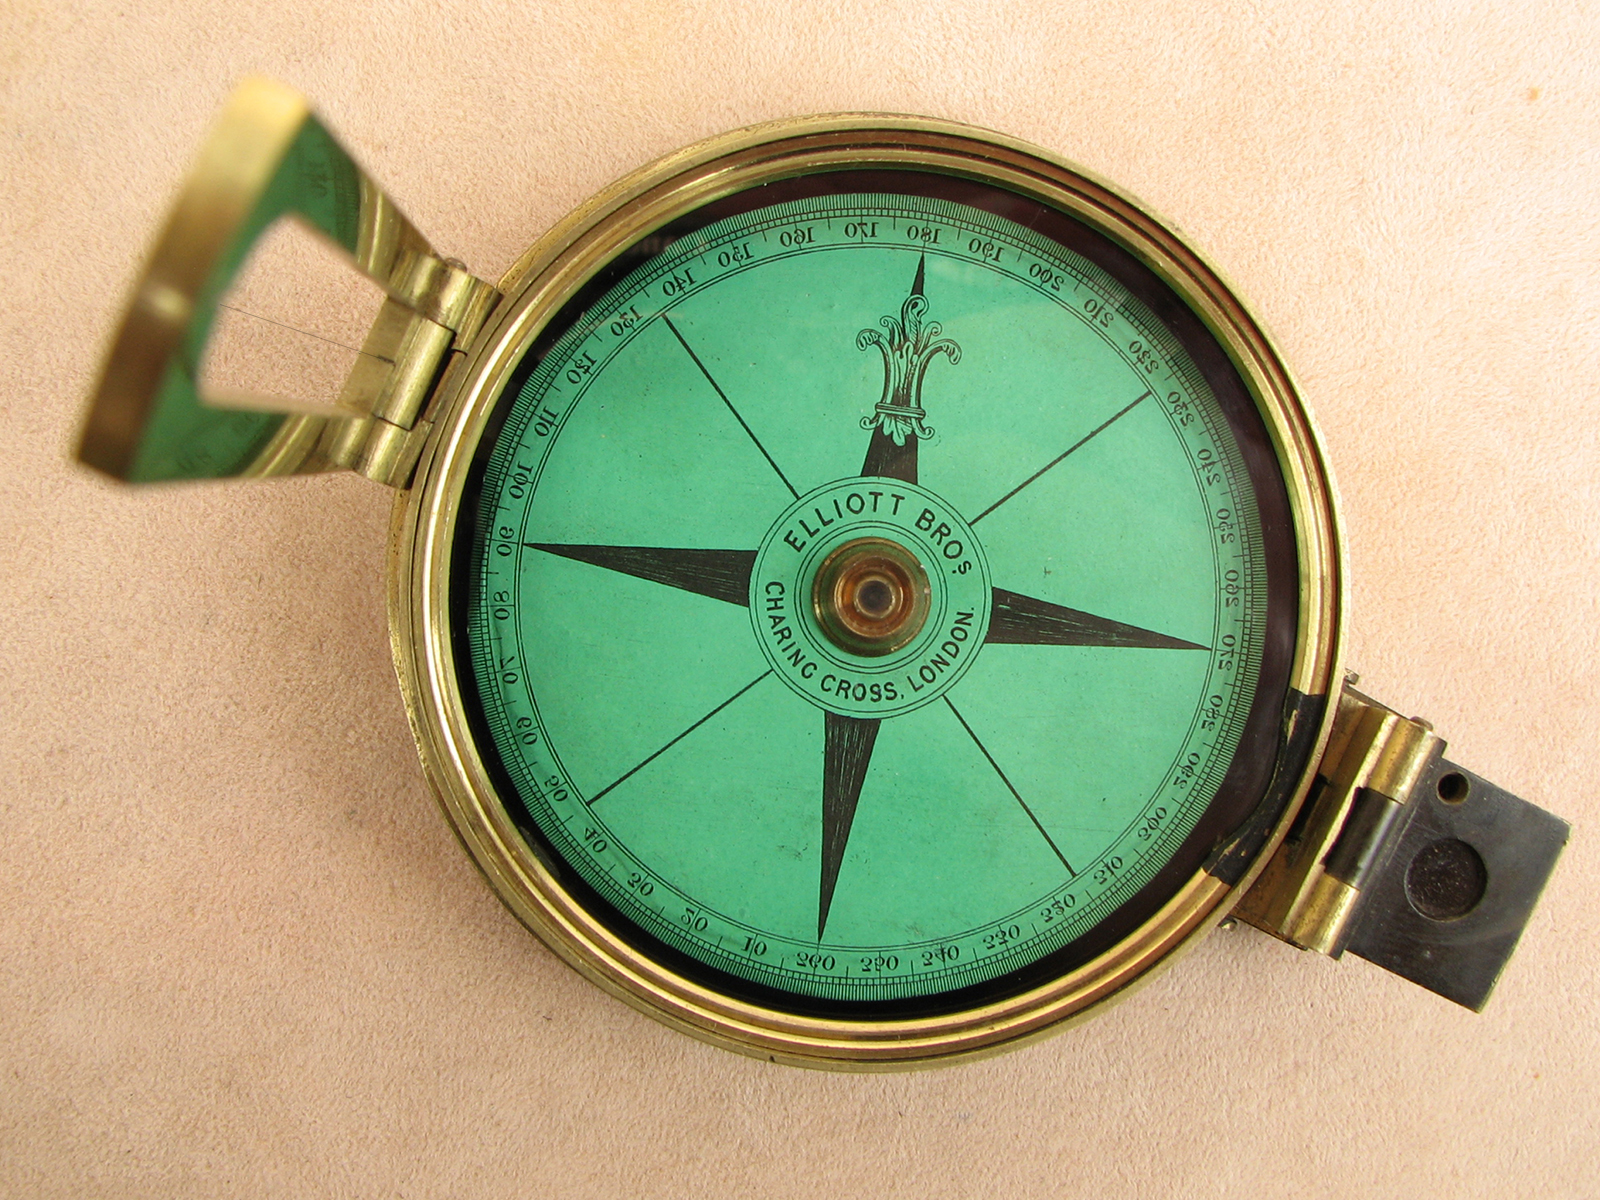 Mid 19th century prismatic sighting compass in case by Elliott Brothers, London